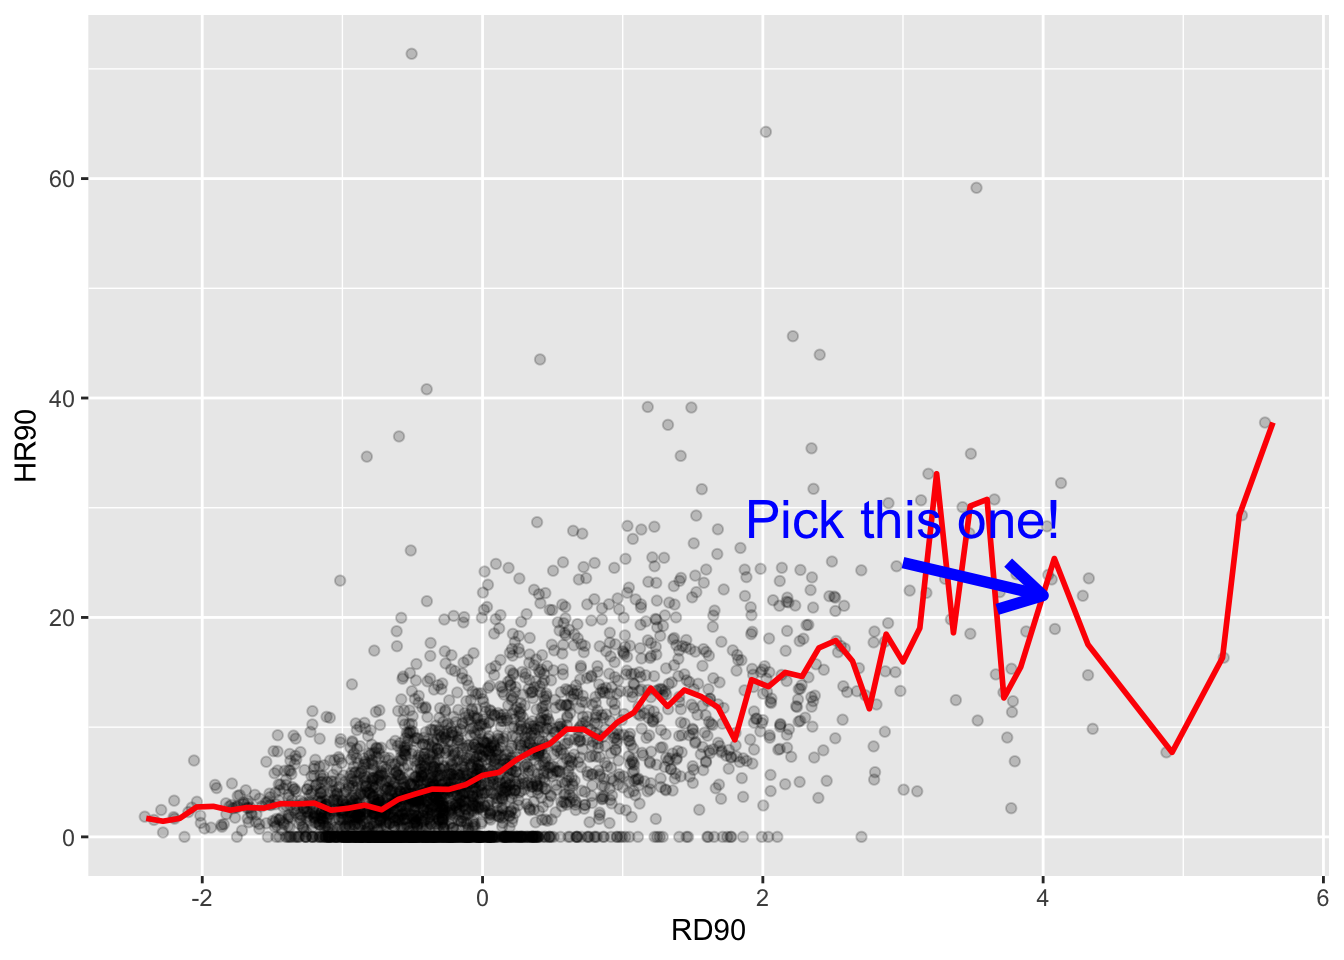 The scatterplot from before now has a red line plotted on it, generally increasing from left to right. It increases more smoothly where there are more points plotted, and jumps up and down once the data becomes sparse at higher RD90. At an RD90 value of 4, the red line has a value of around 22. A blue arrow with the text 'Pick this one!' is overlaid on the plot, pointing to this spot.